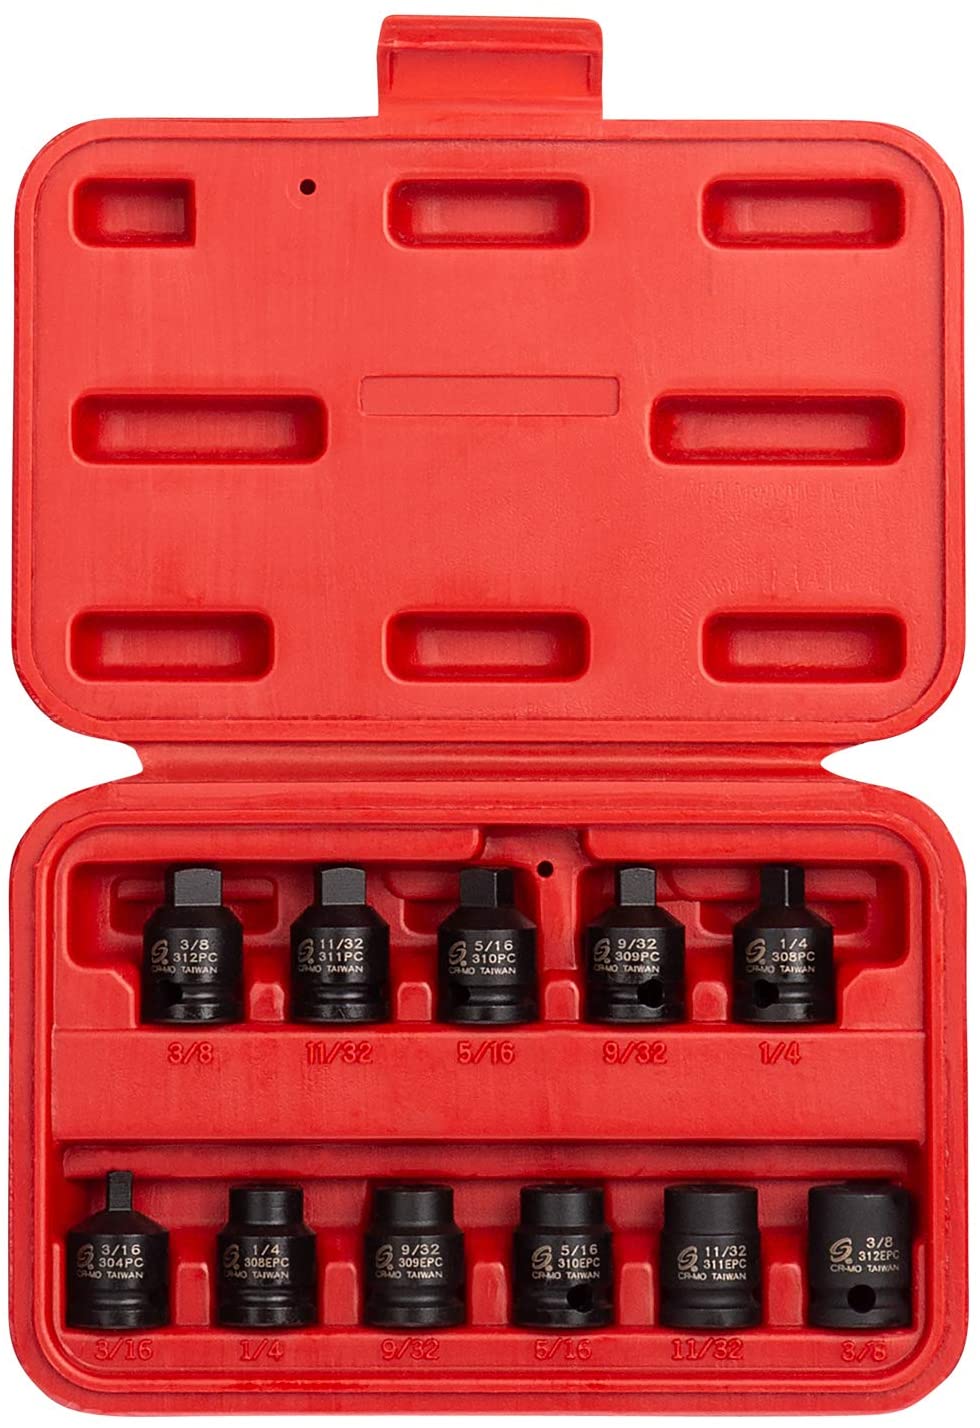 Sunex 3841, 3/8 Inch Drive Pipe Plug Socket Set, 11-Piece, SAE, 7/16" - 5/8", Cr-Mo Steel, Tapered Male Square Drive, Chamfered Female Square Drive, Heavy Duty Storage - MPR Tools & Equipment